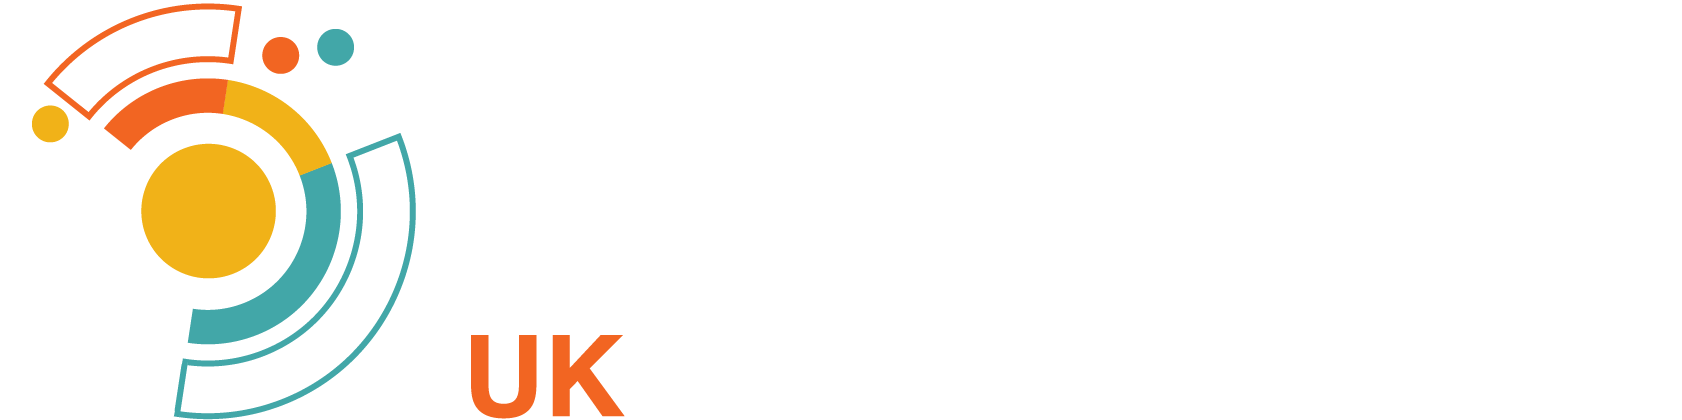 UK Financial Services Information Security Network